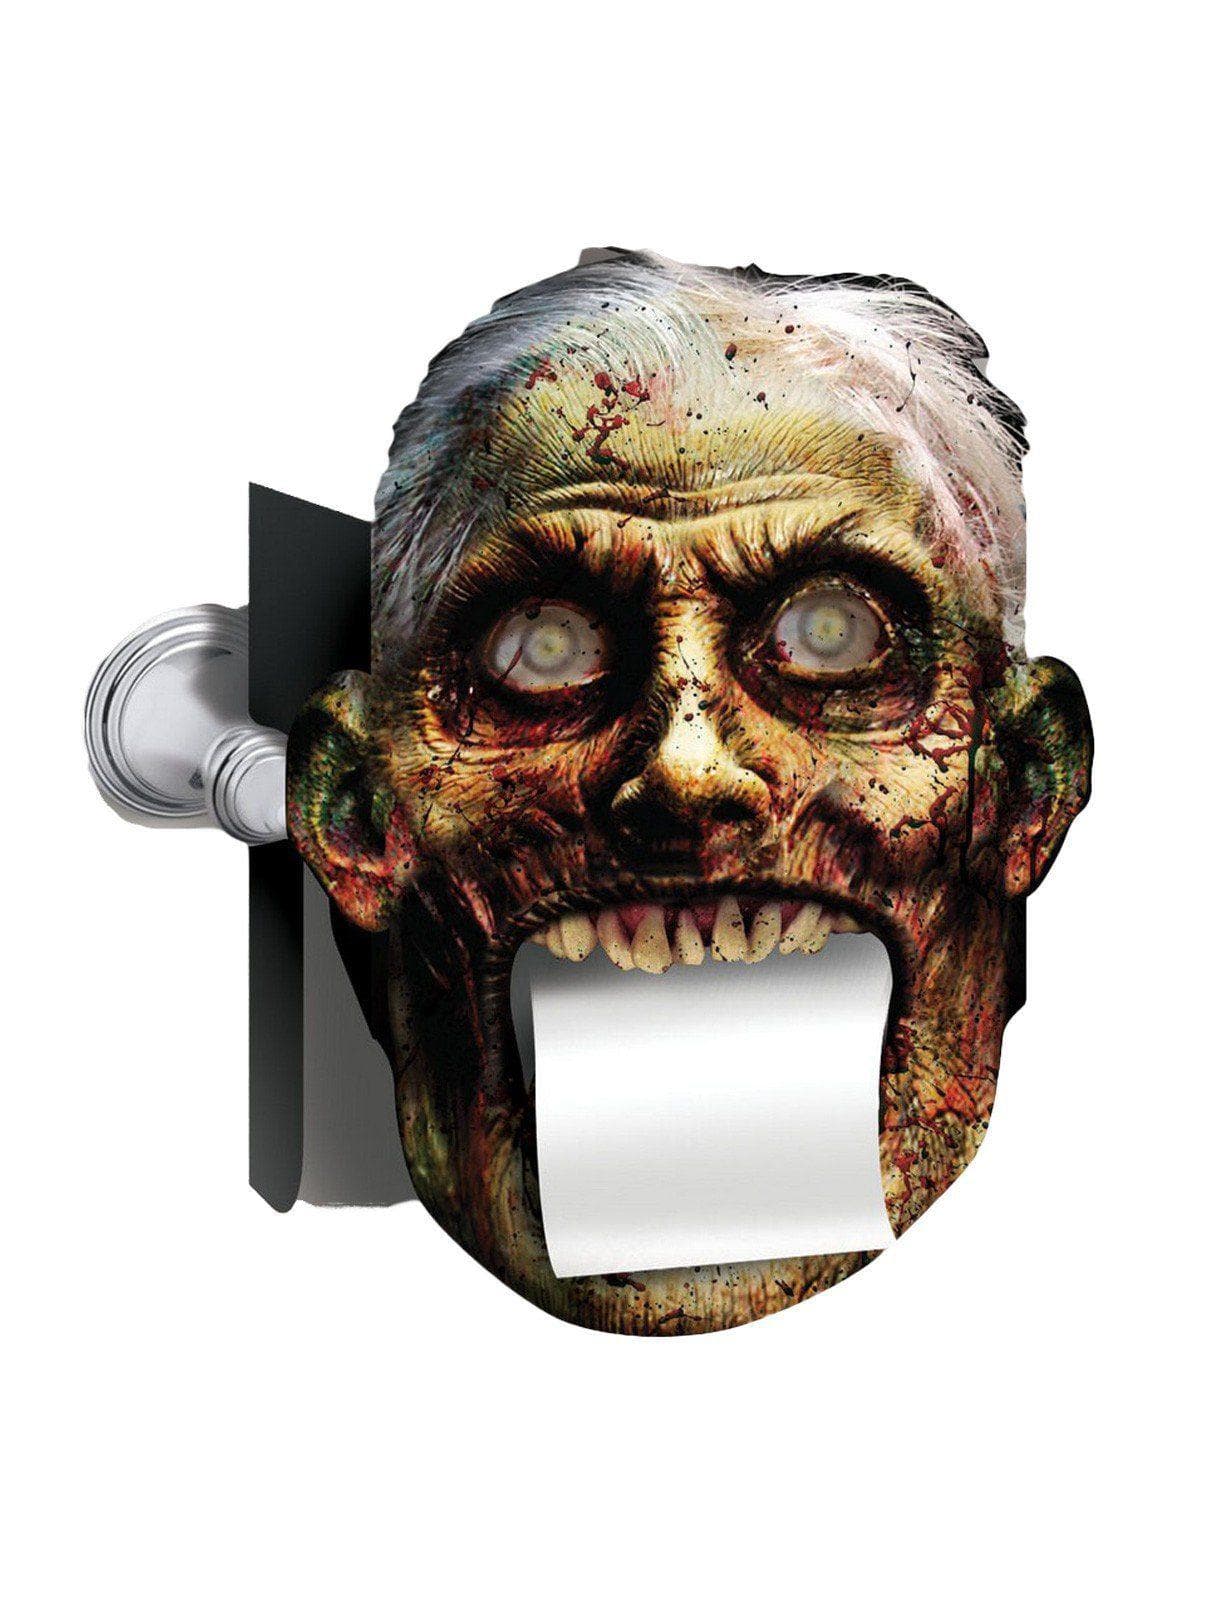 Bloody Bath Zombie Toilet Paper Cover - costumes.com